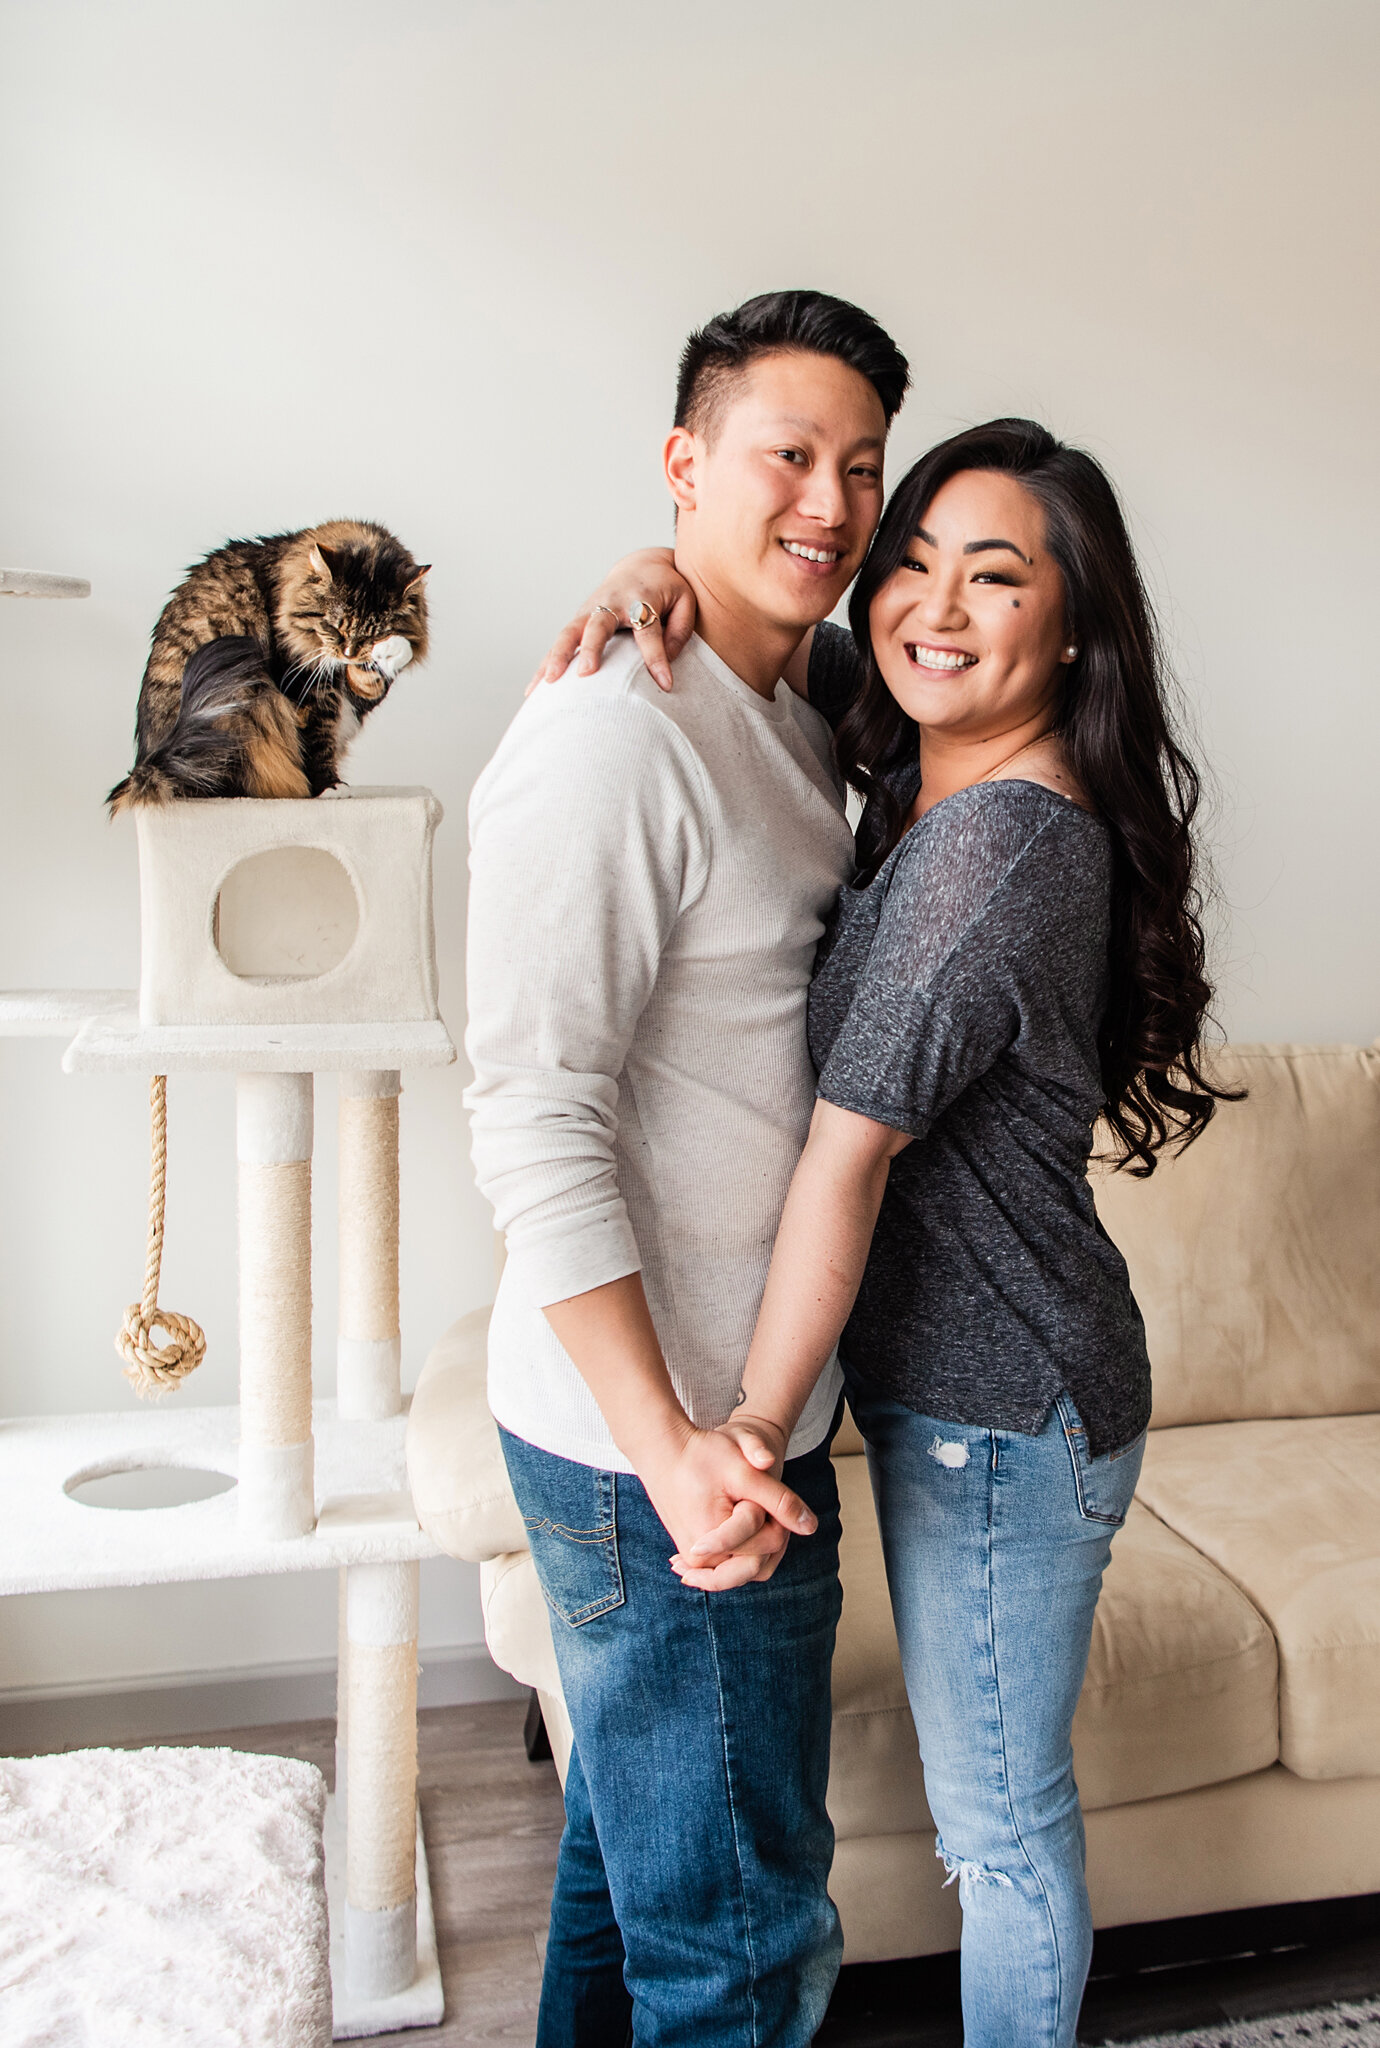 In_Home_Rochester_Couples_Session_JILL_STUDIO_Rochester_NY_Photographer_4145.jpg